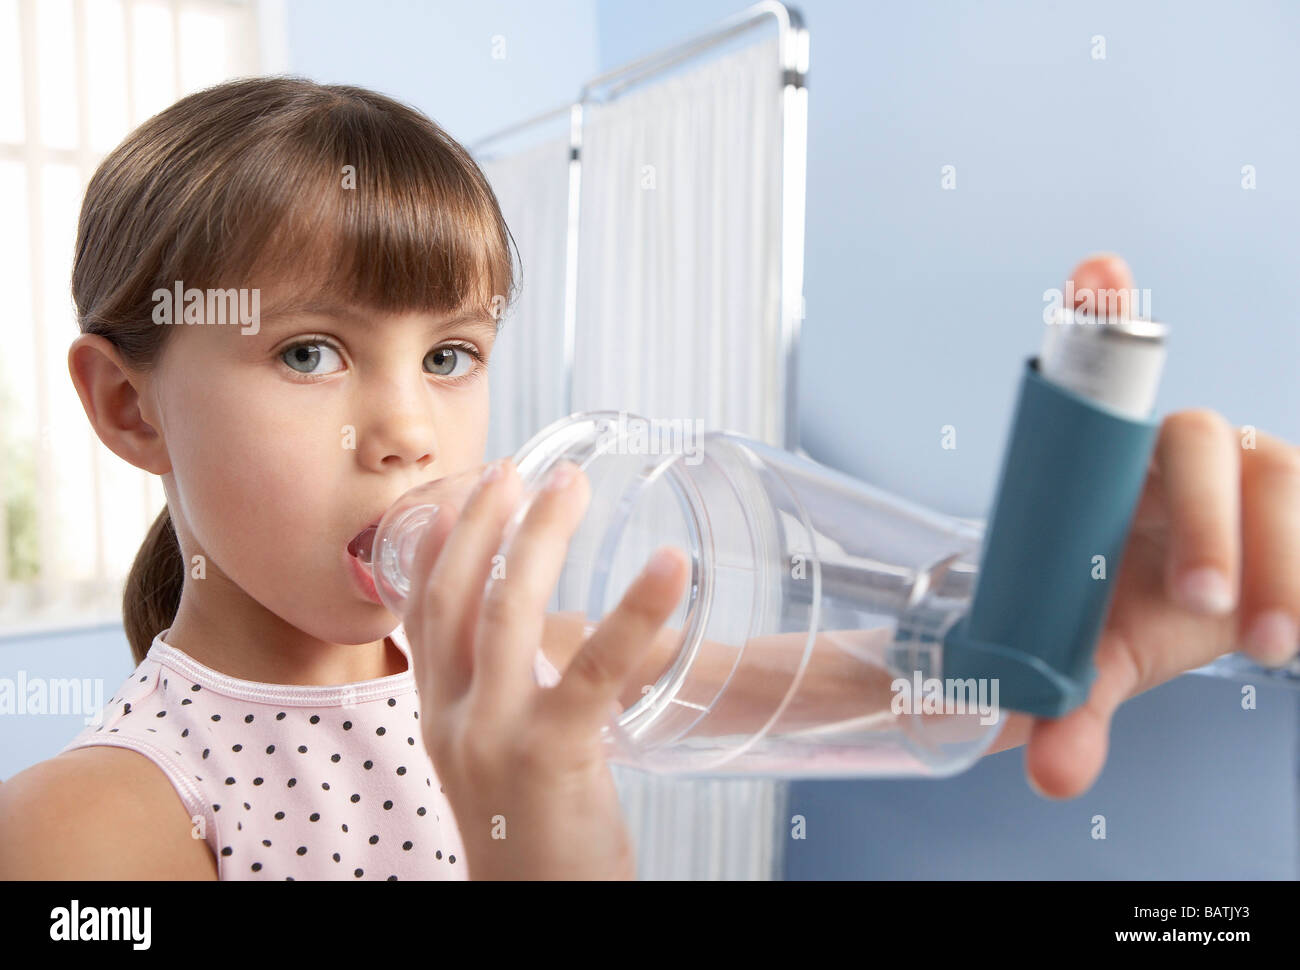 Asthma spacer. Young girl using a spacer (plastic chamber) with an inhaler, to treat her asthma. Stock Photo